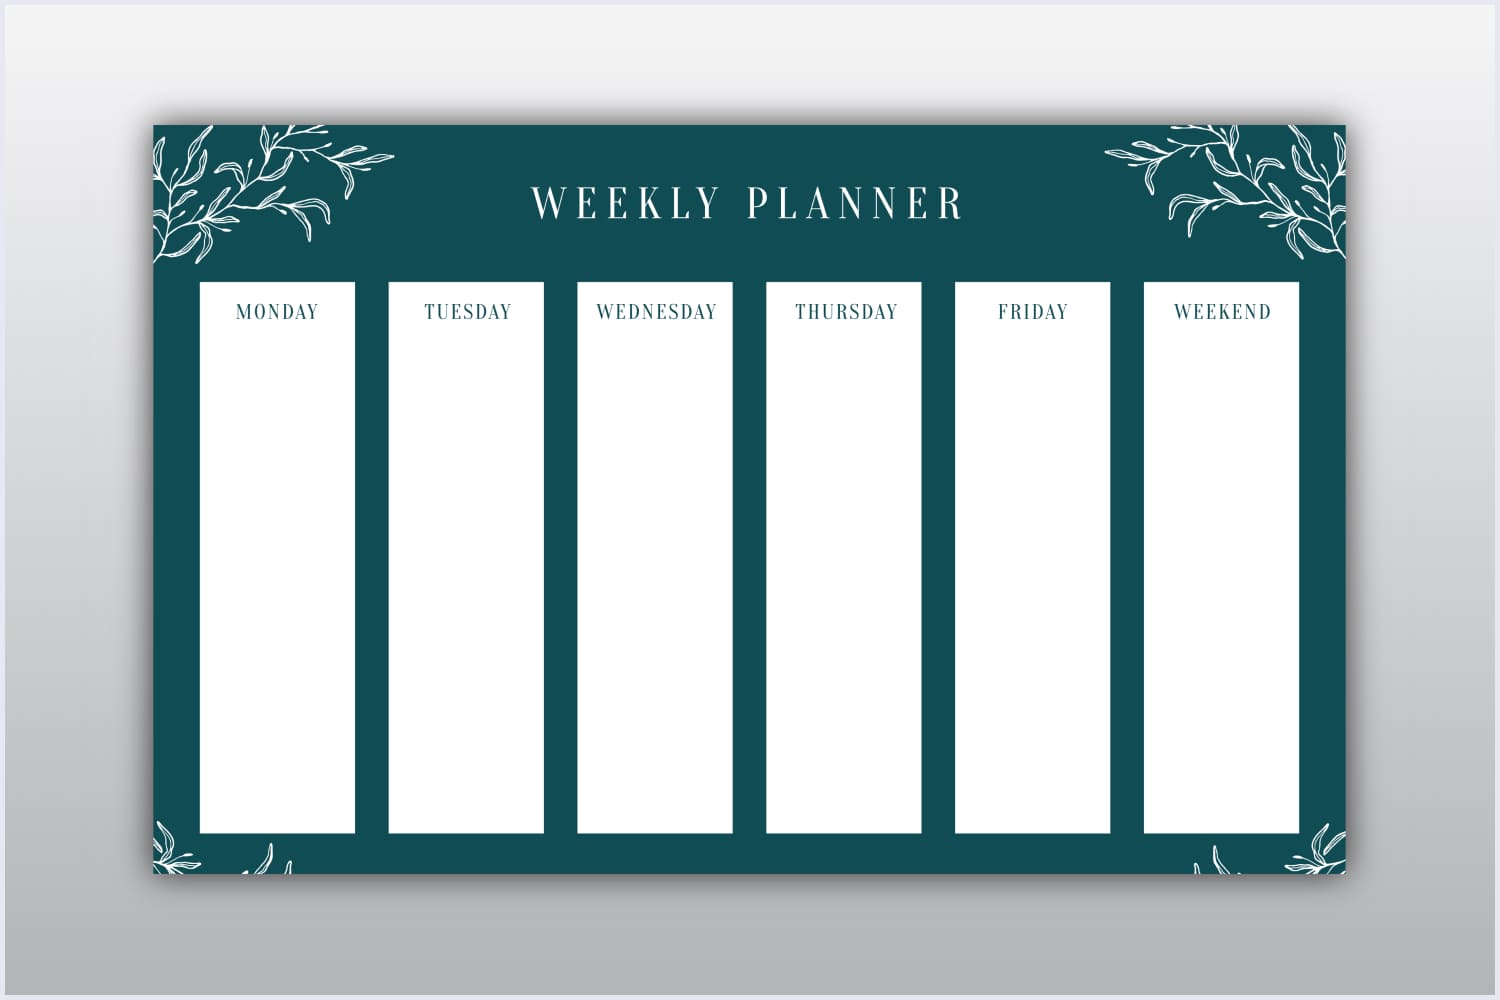 Weekly calendar in the form of a sheet with white blocks of days and a green background.